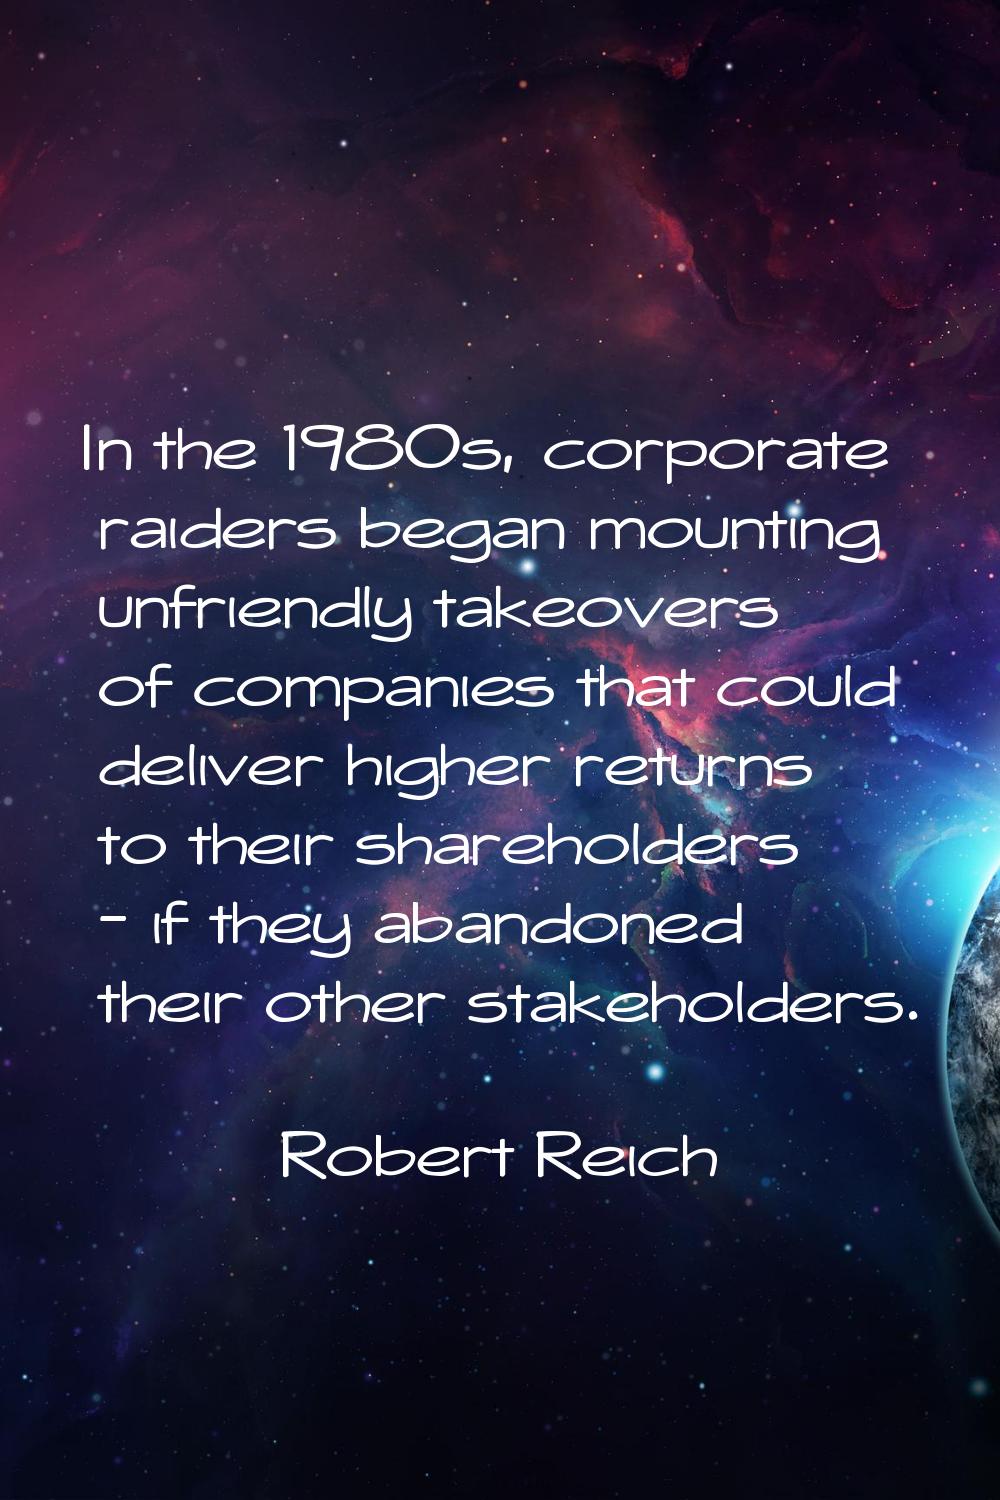 In the 1980s, corporate raiders began mounting unfriendly takeovers of companies that could deliver